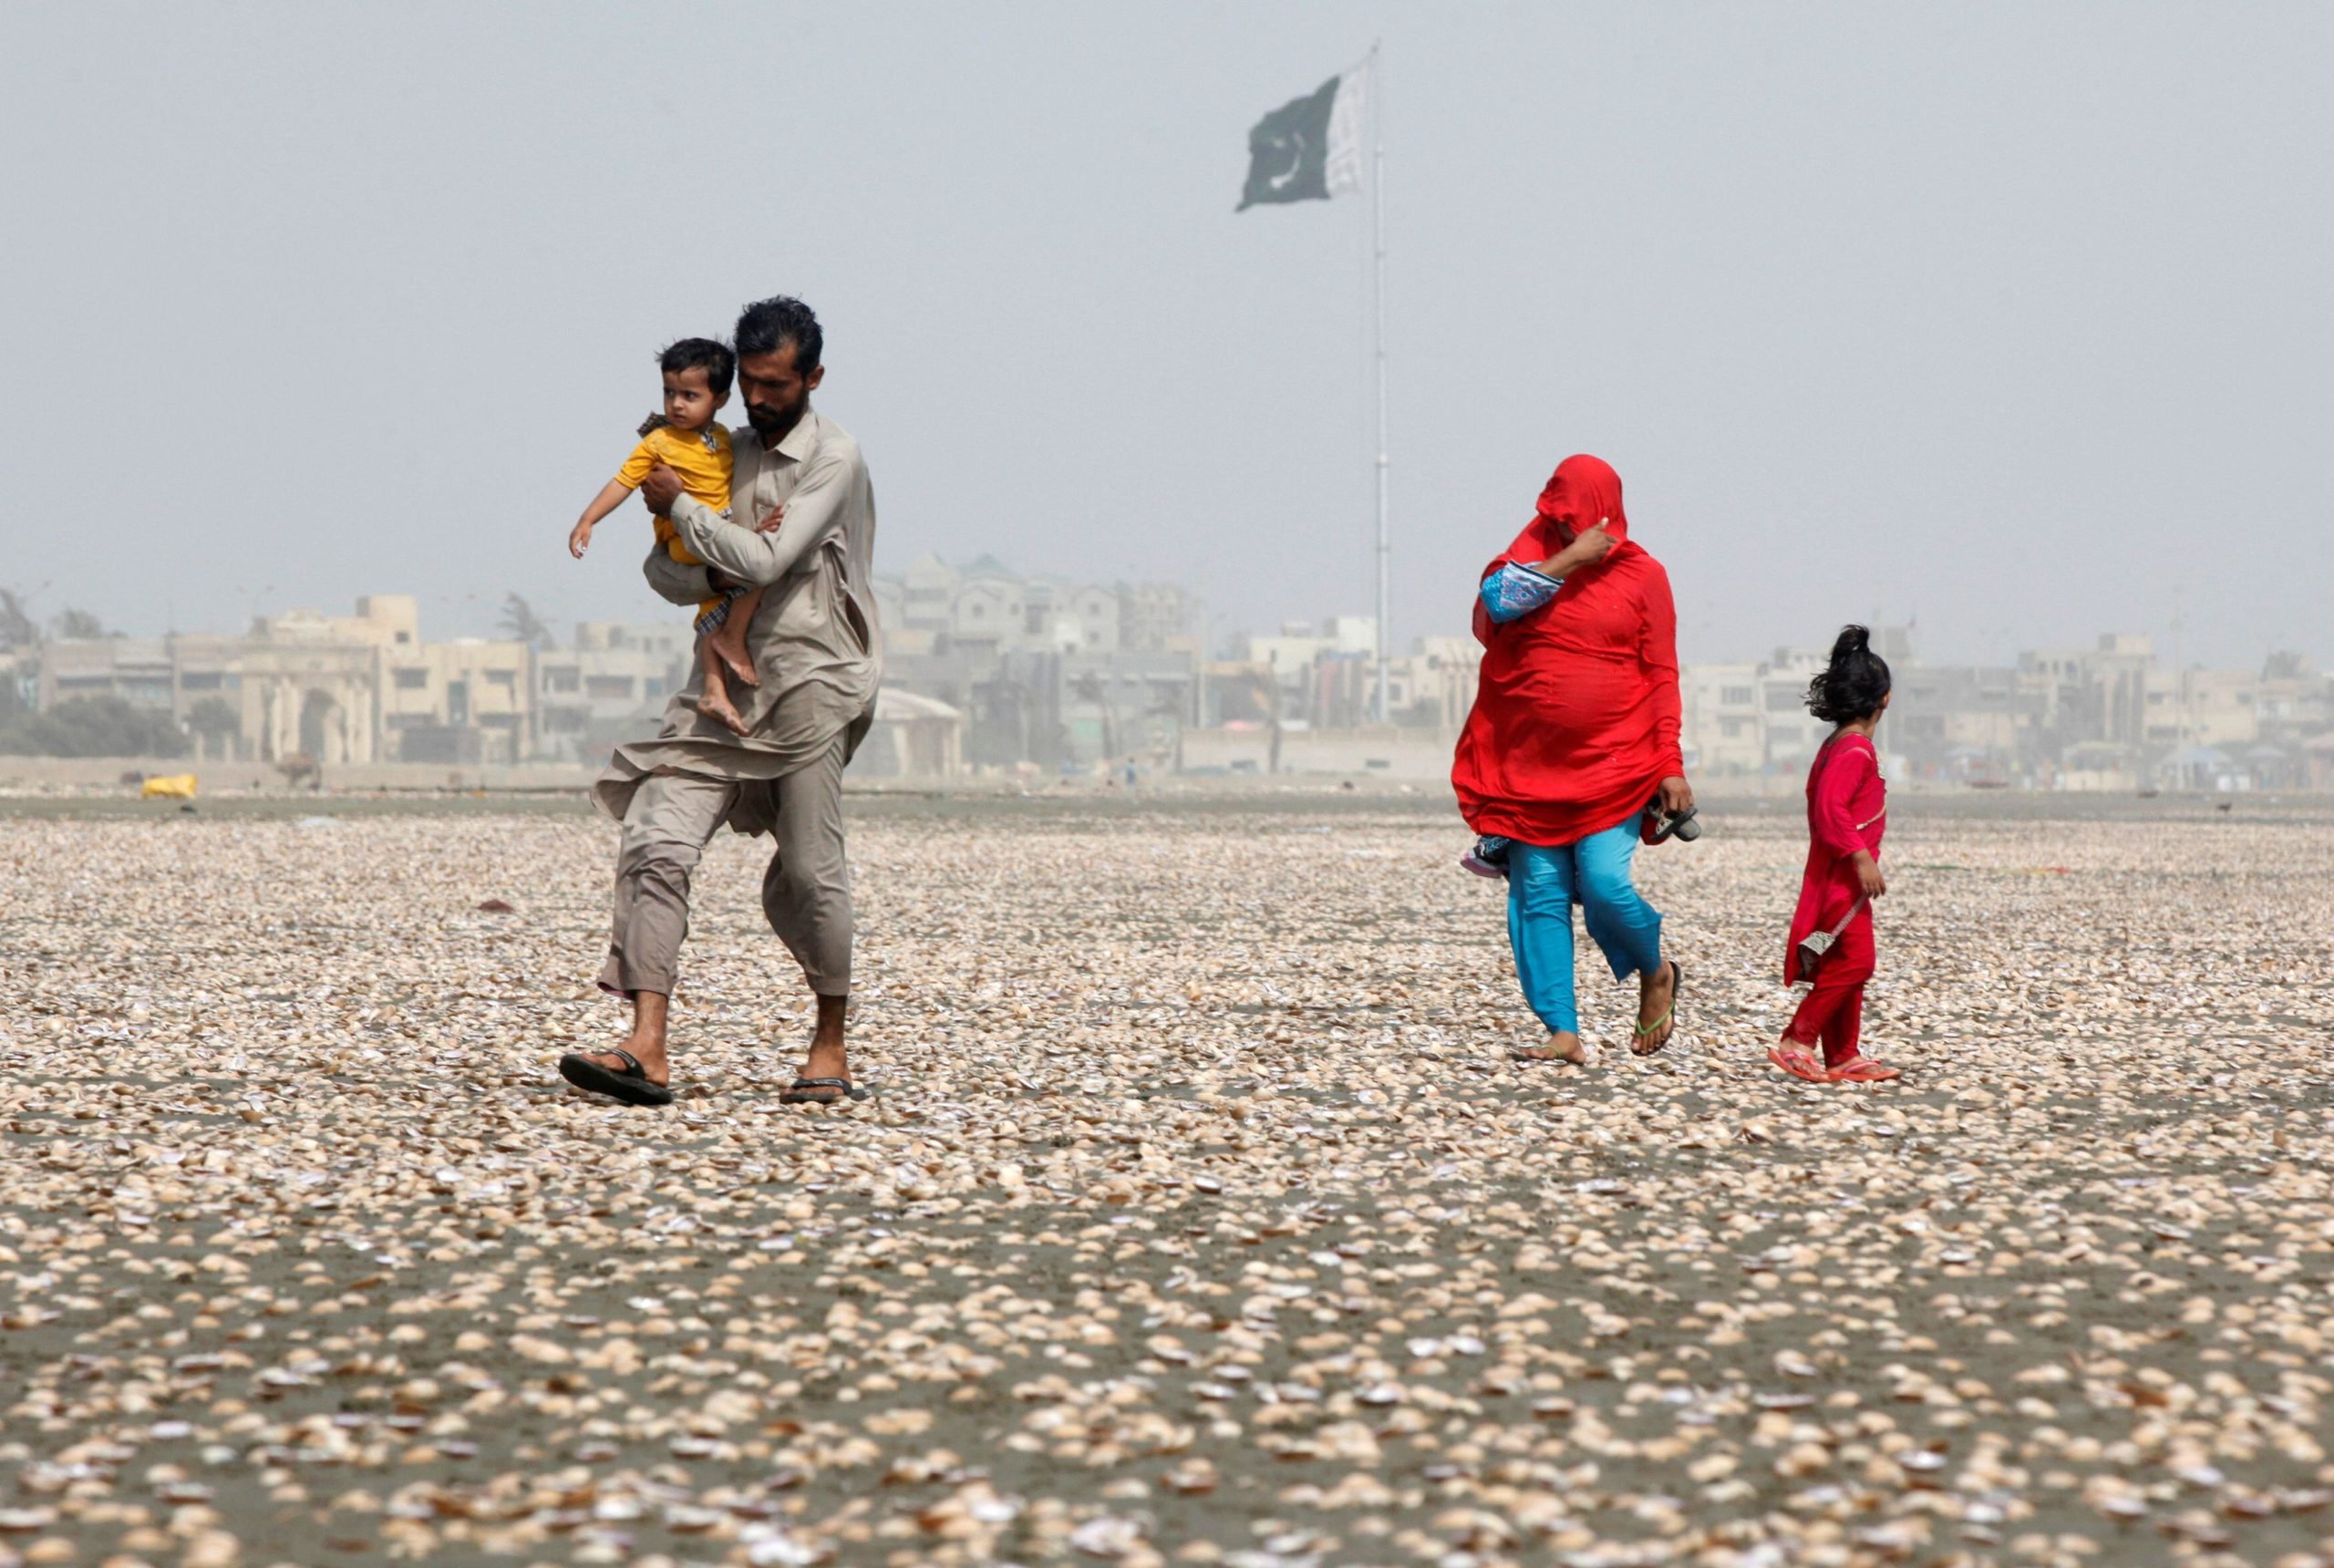 <p>A family walk along the beach on a hot day in Karachi, Pakistan, in May 2016 (Image: Reuters/Akhtar Soomro)</p>